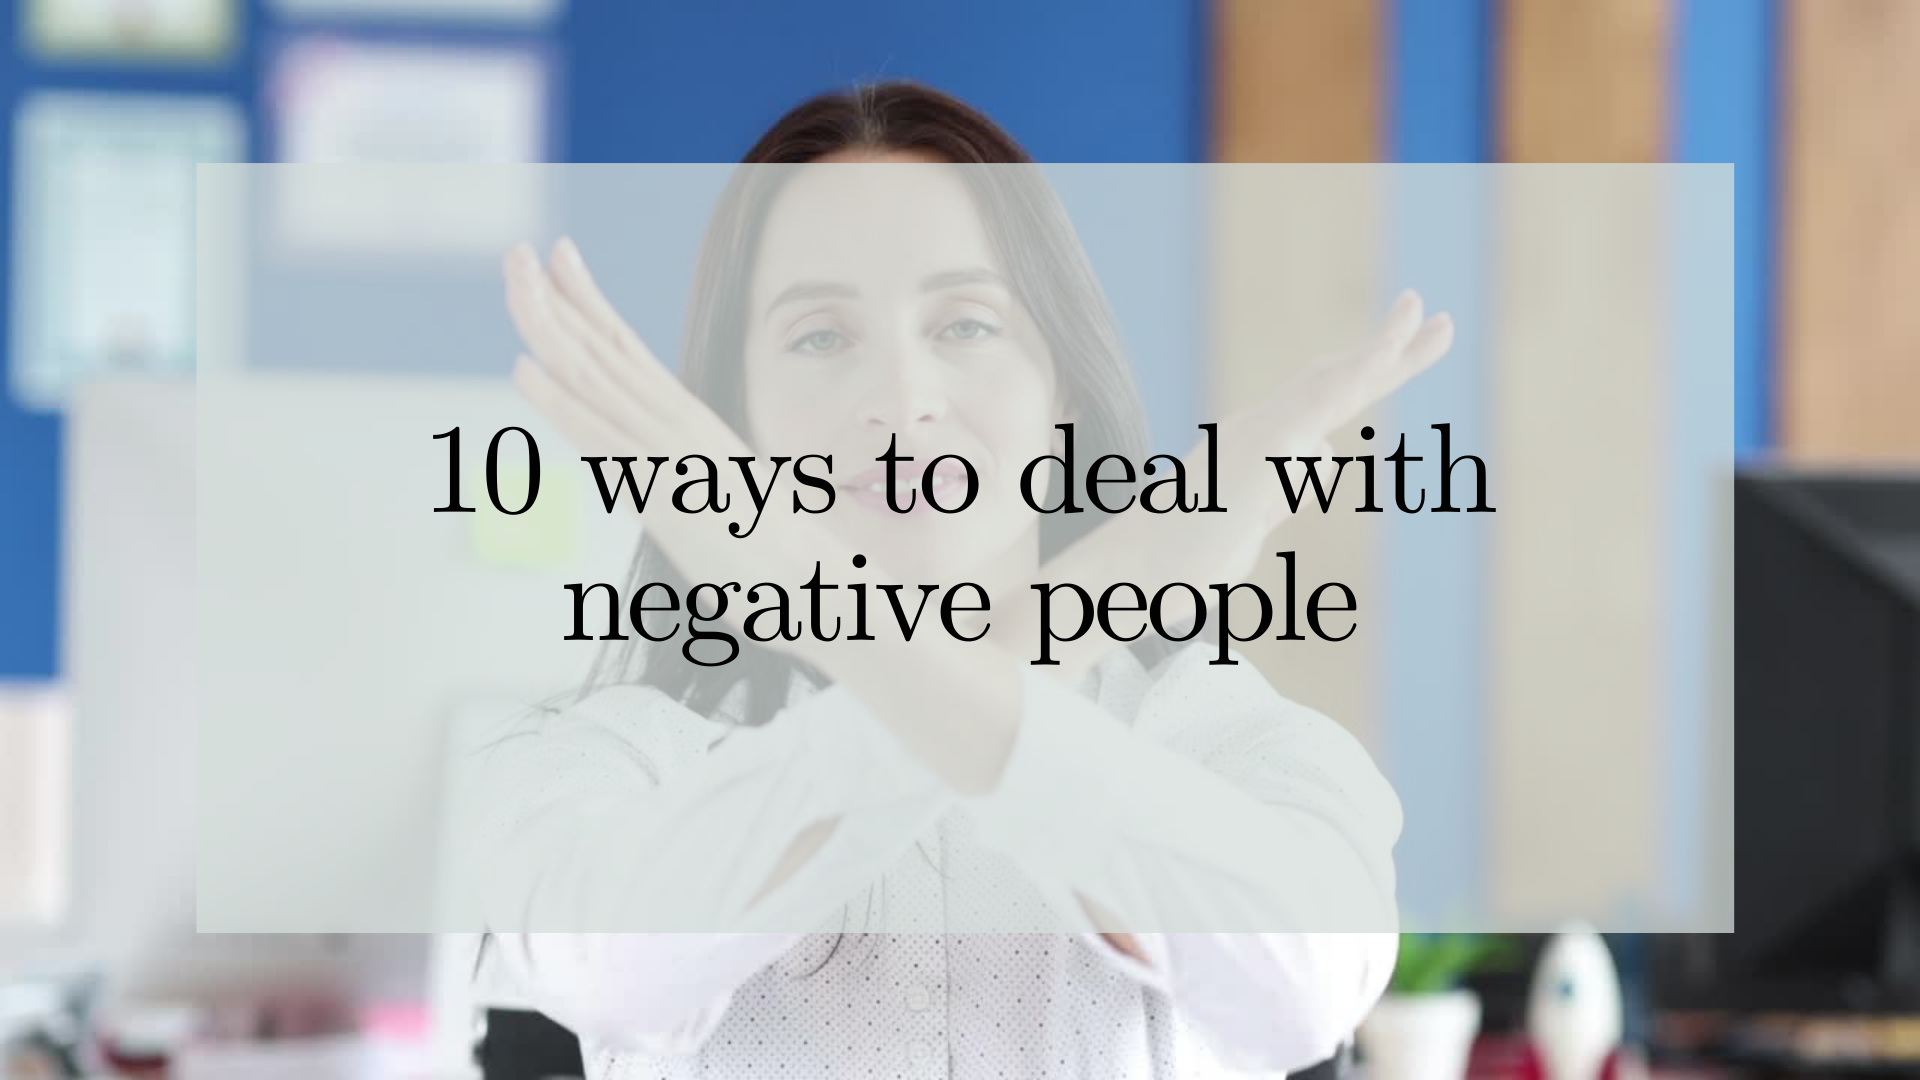 10 Ways to Deal With Negative People